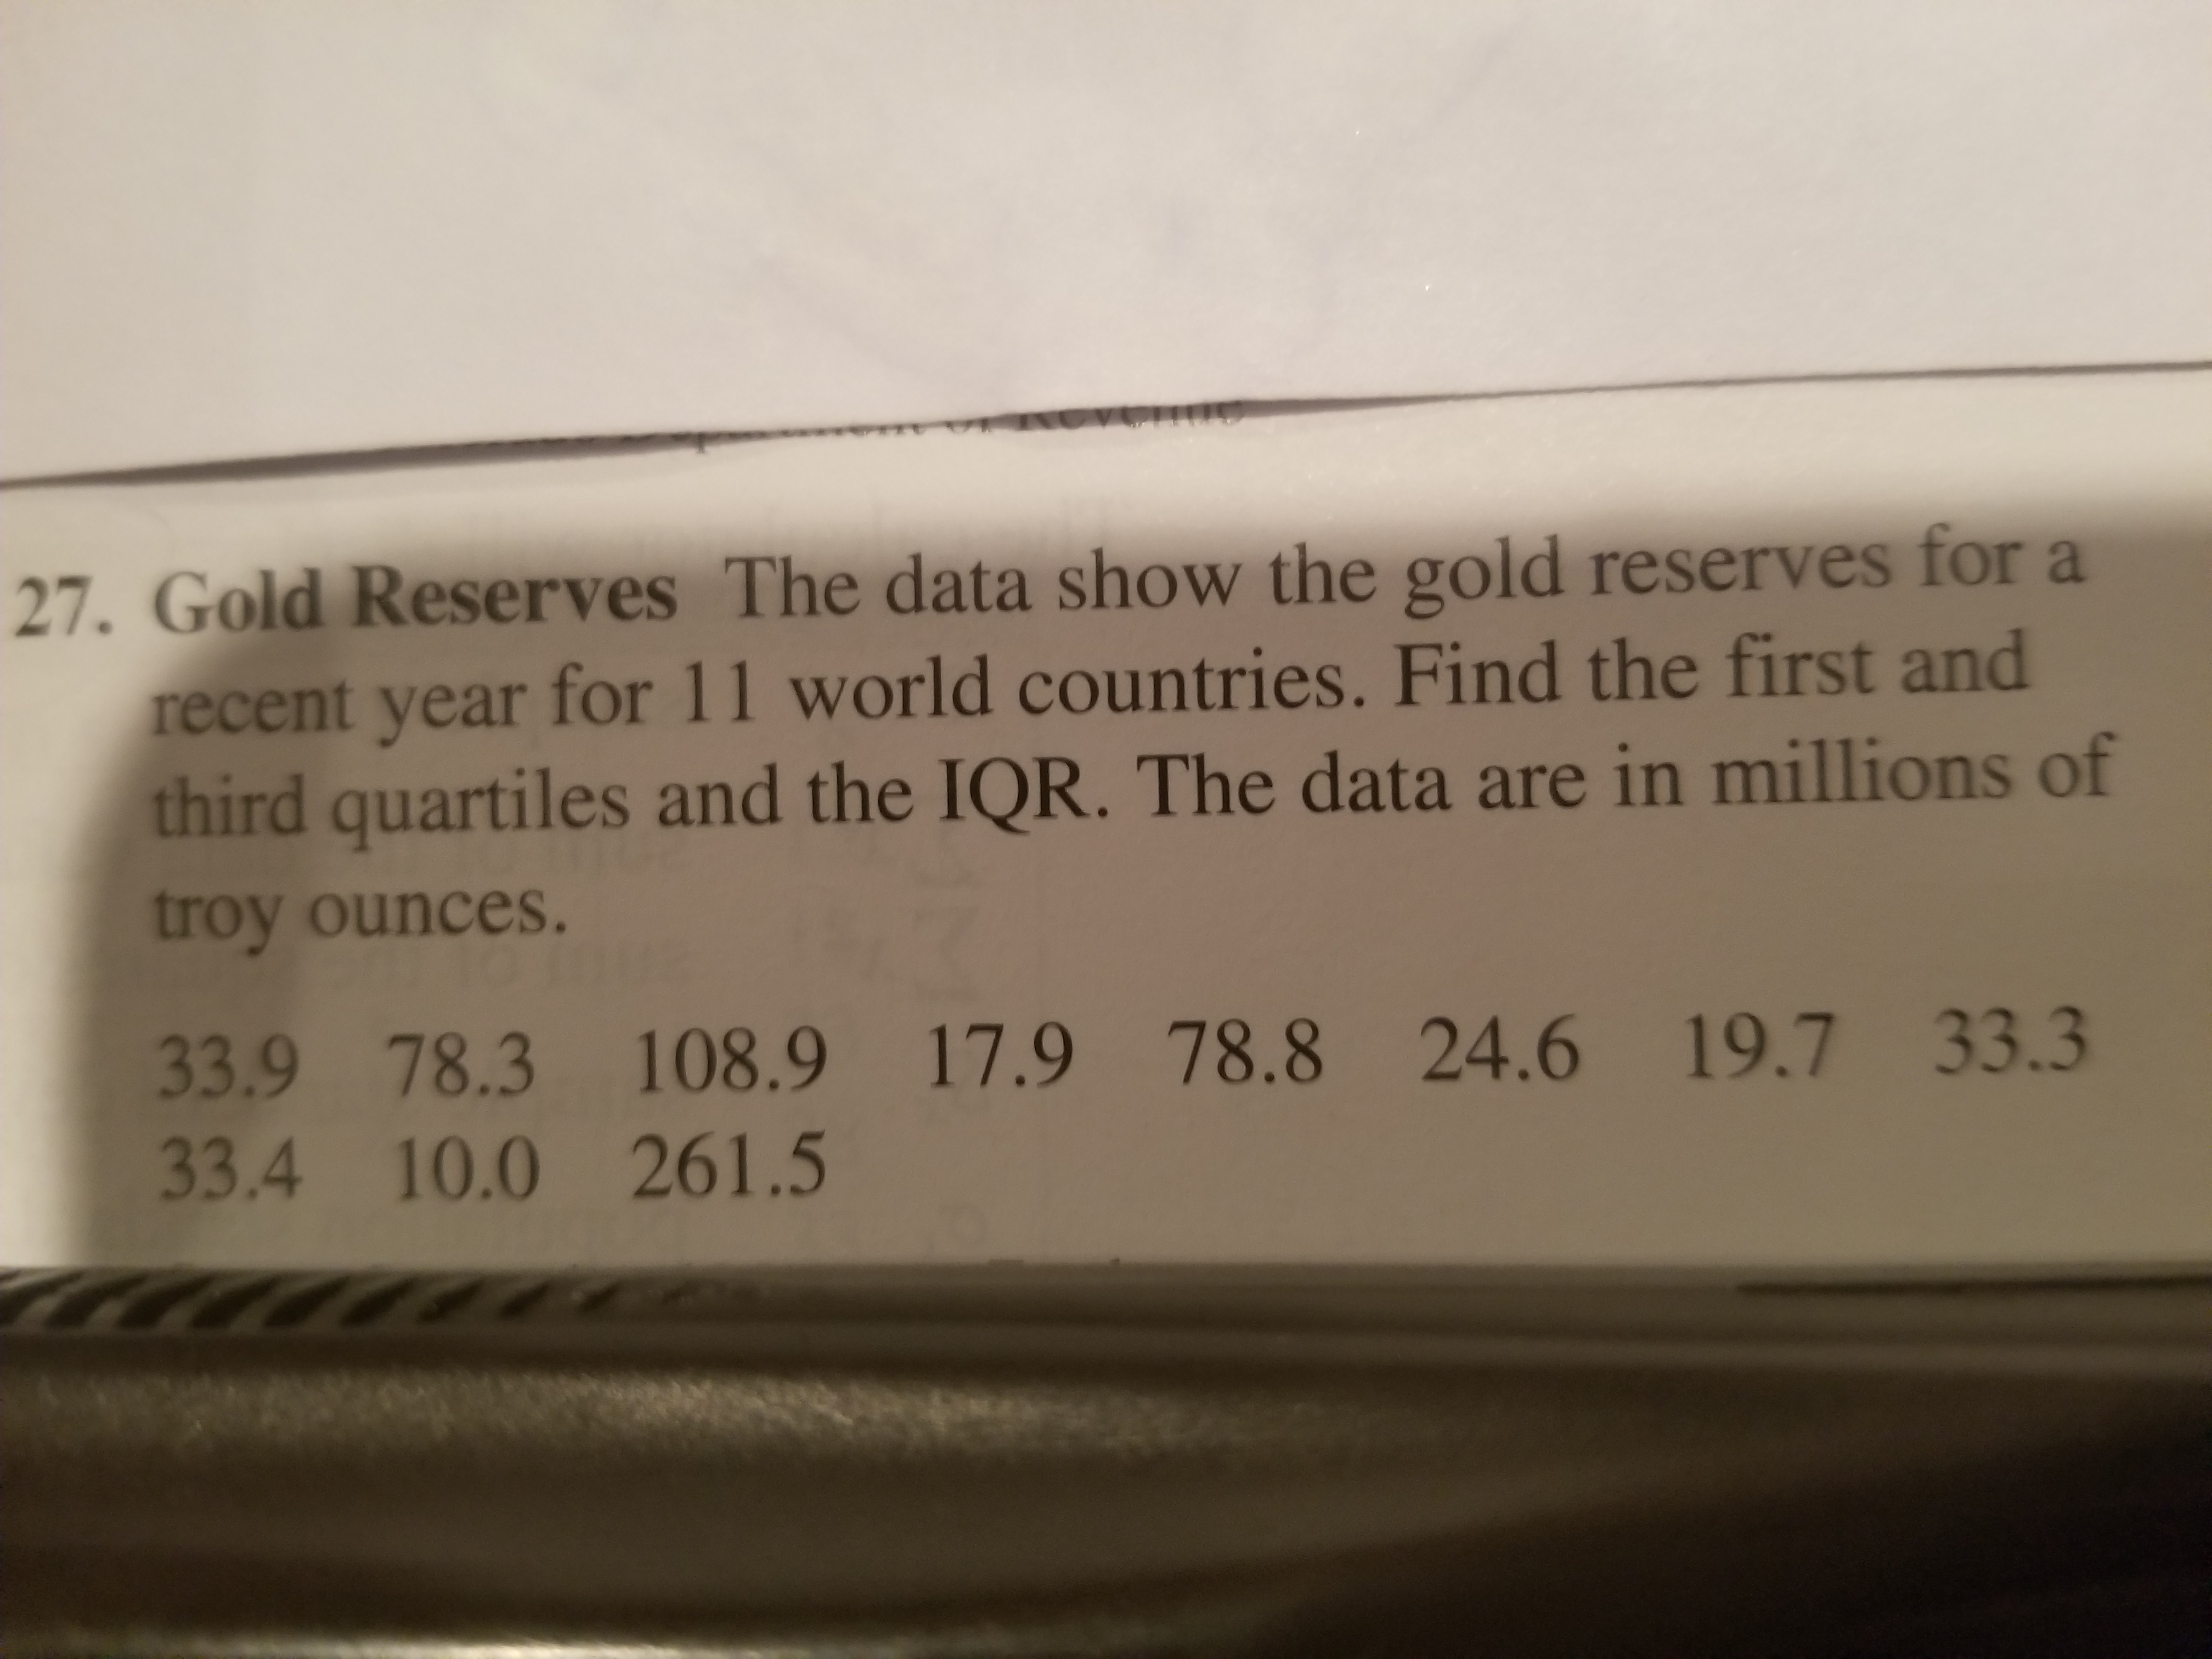 27. Gold Reserves The data show the gold reserves for a
recent year for 11 world countries. Find the first and
third quartiles and the IQR. The data are in millions of
troy ounces.
33.9 78.3 108.9 17.9 78.8 24.6 19.7 33.3
33.4 10.0 261.5
